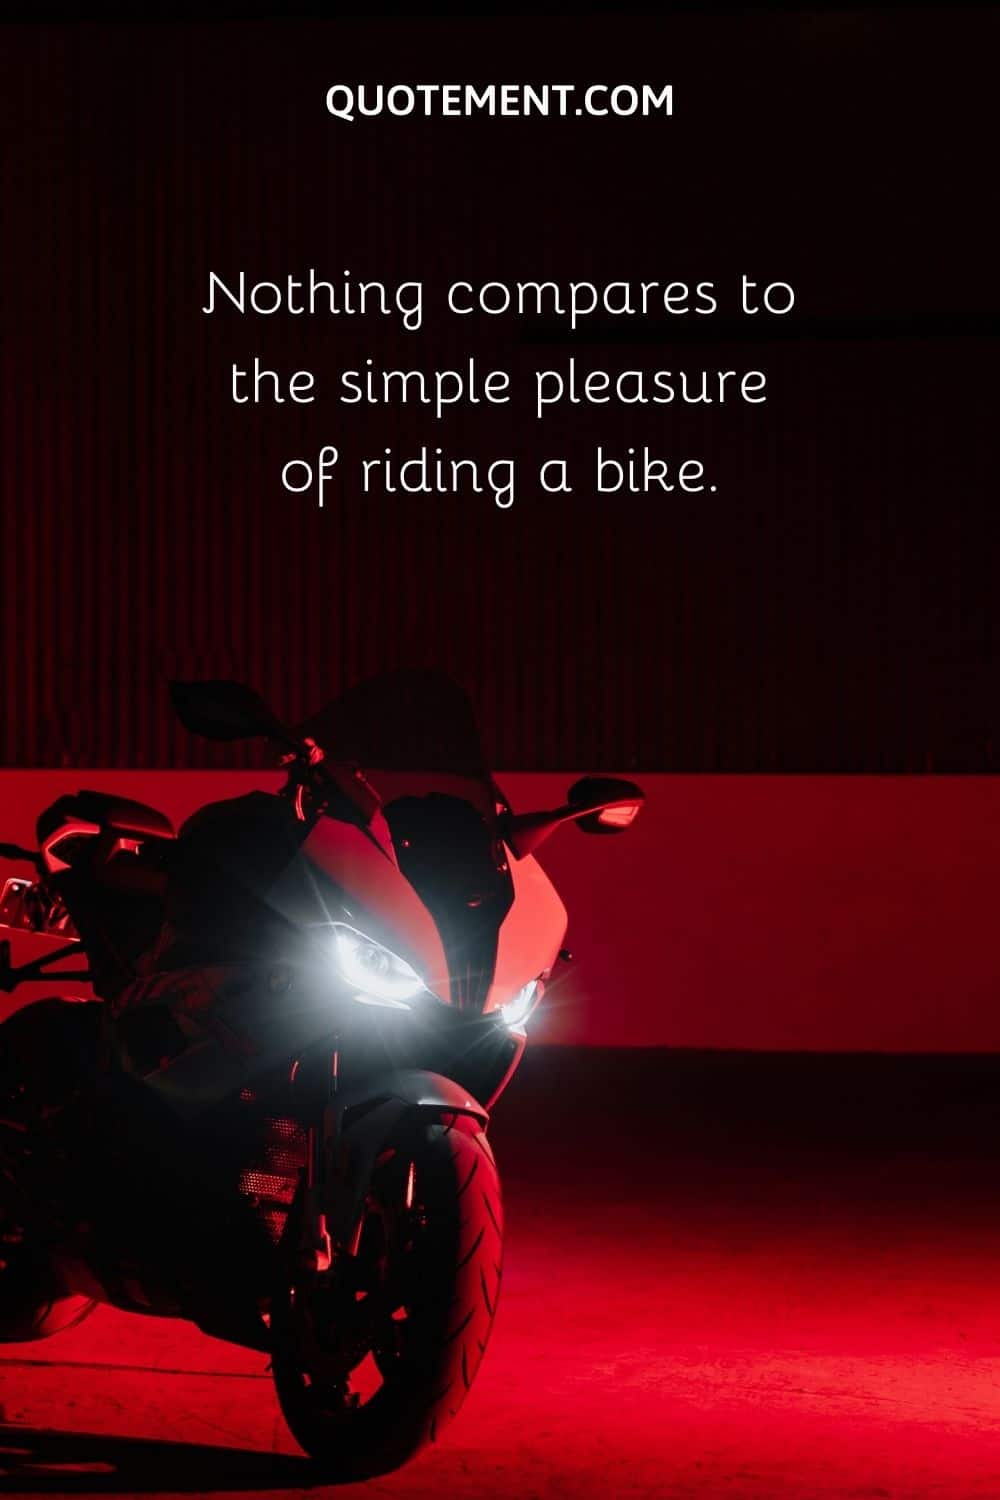 Nothing compares to the simple pleasure of riding a bike.